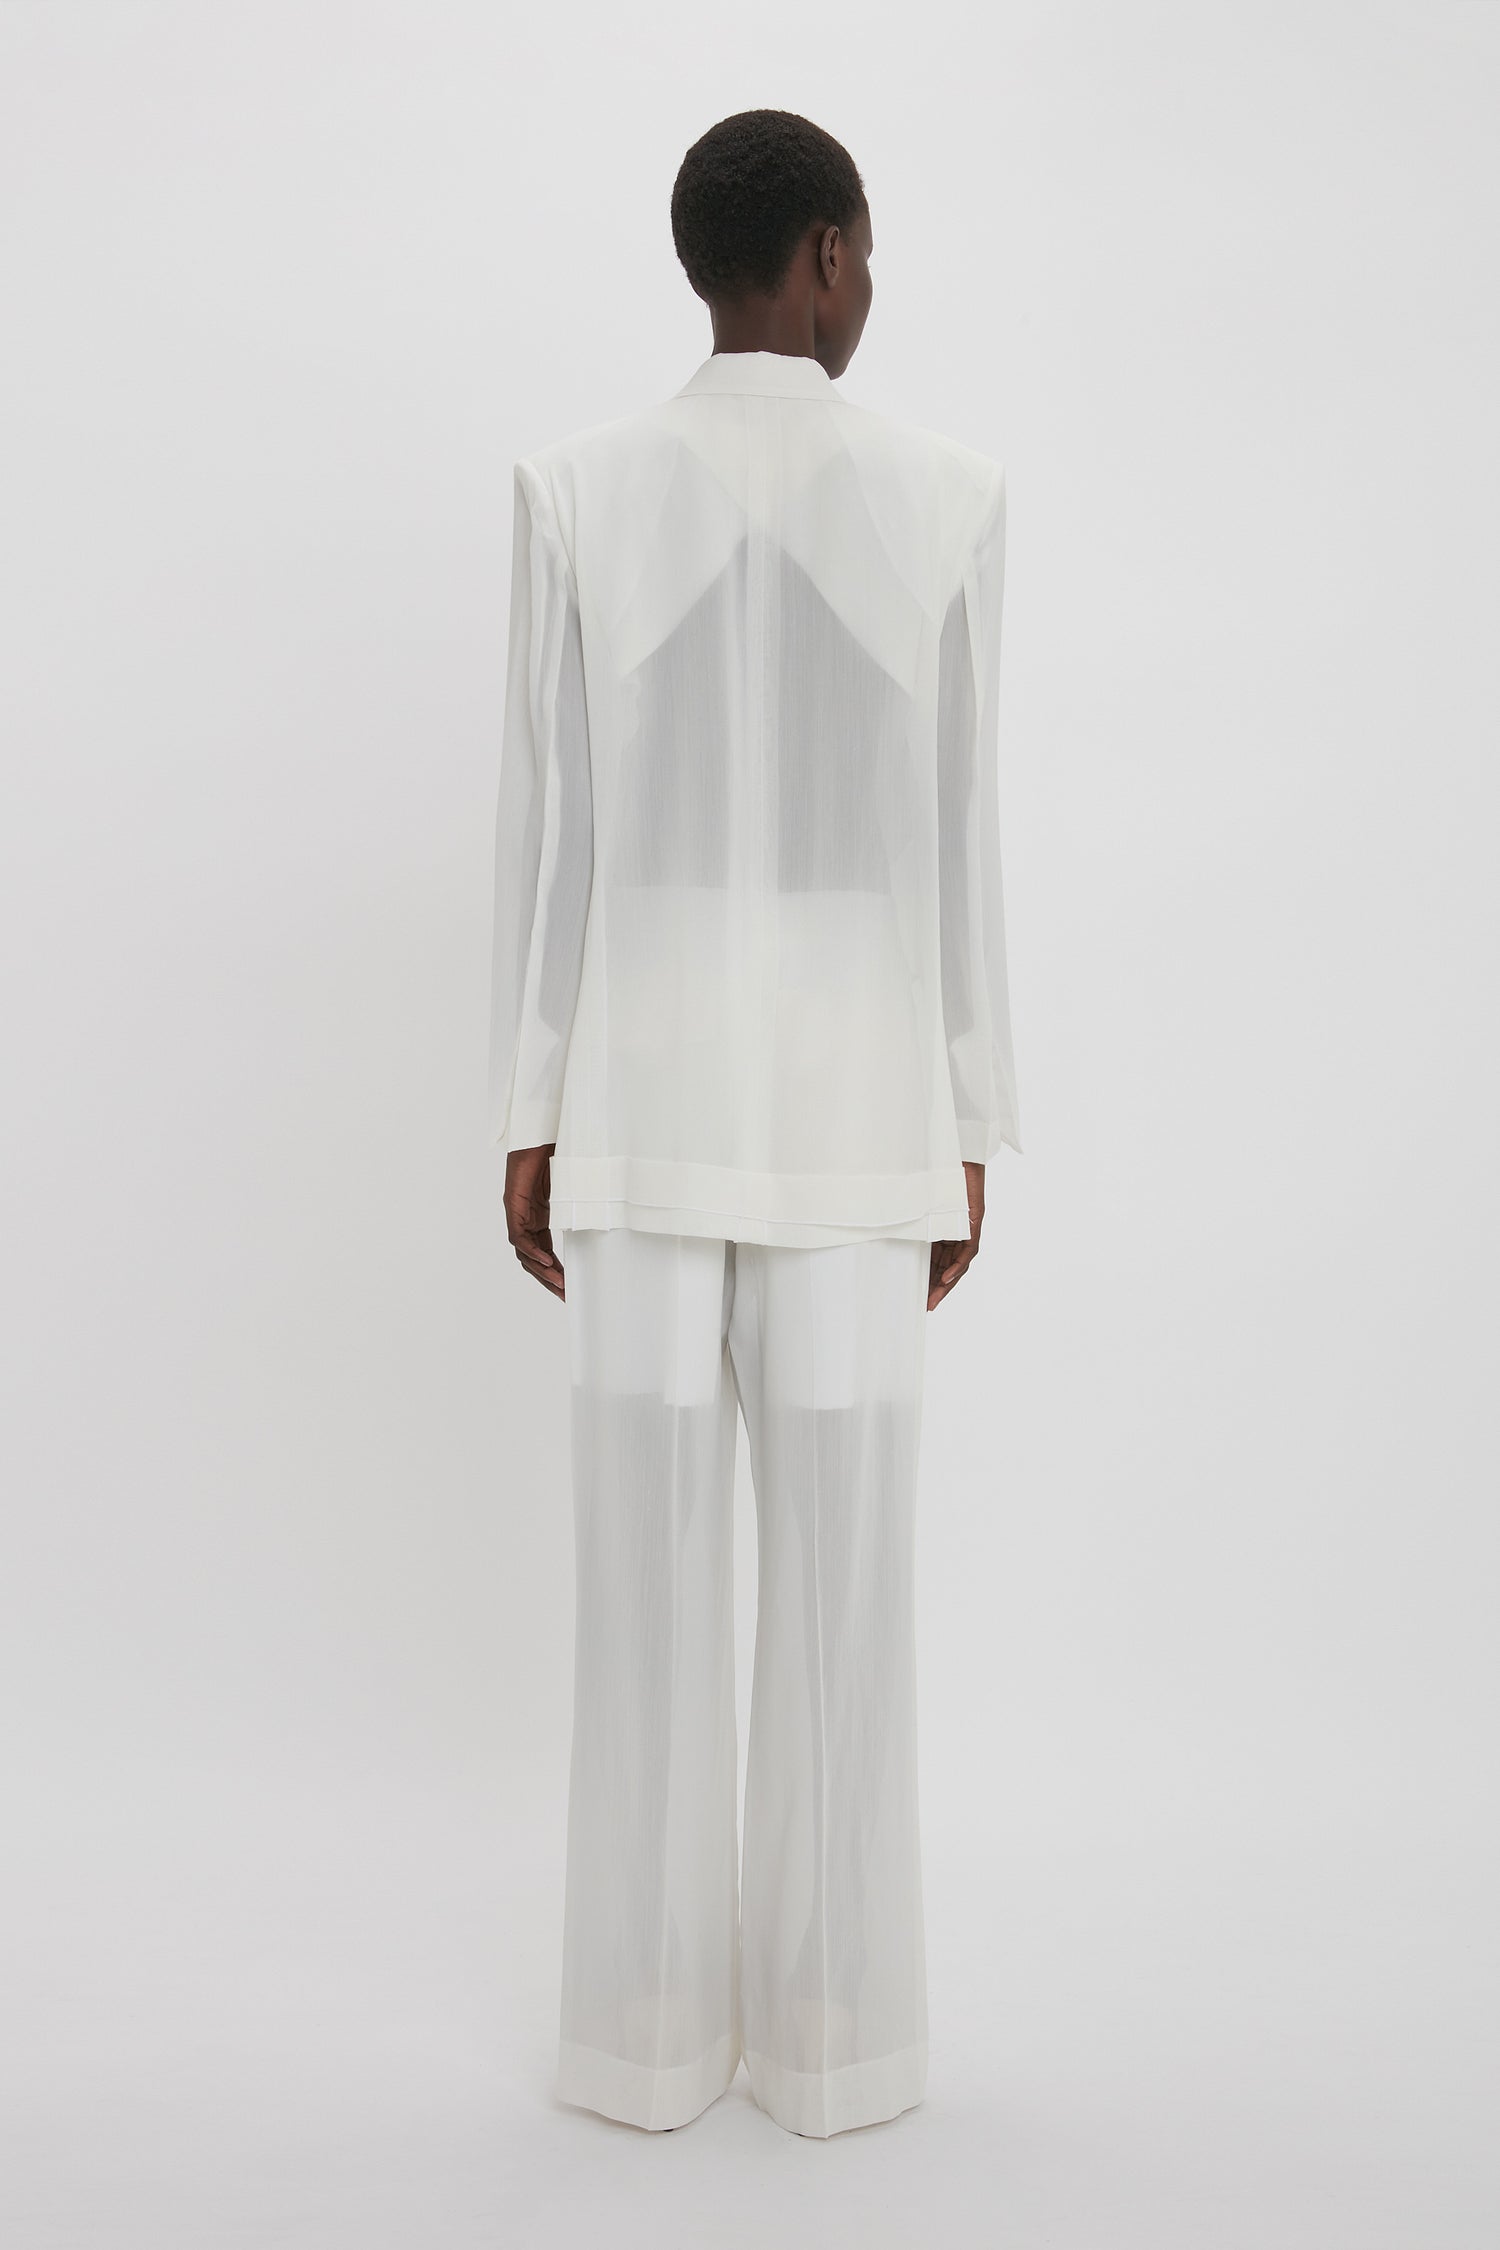 A person with short hair is standing facing away, wearing a white, semi-transparent Fold Detail Tailored Jacket In White by Victoria Beckham and matching white trousers with modern flair against a plain white background.